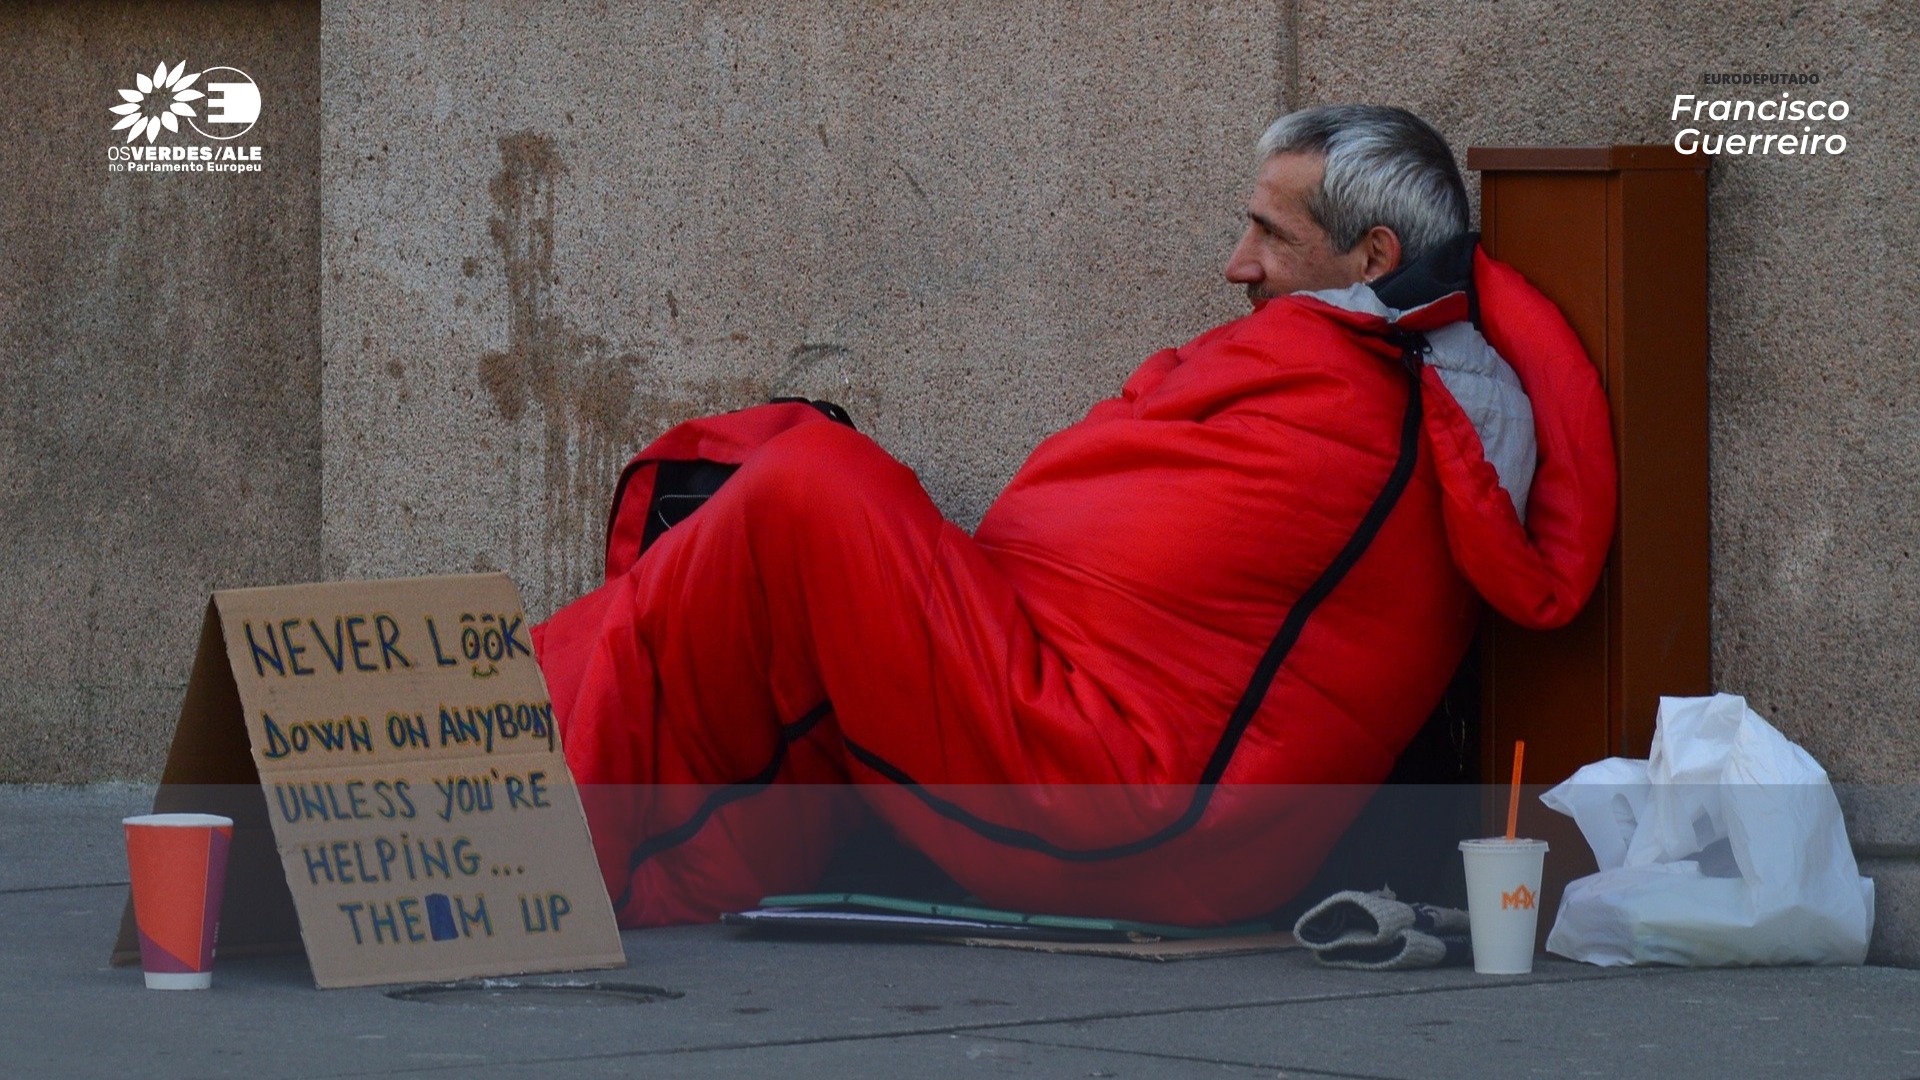 European Commission wants to end homelessness by 2030